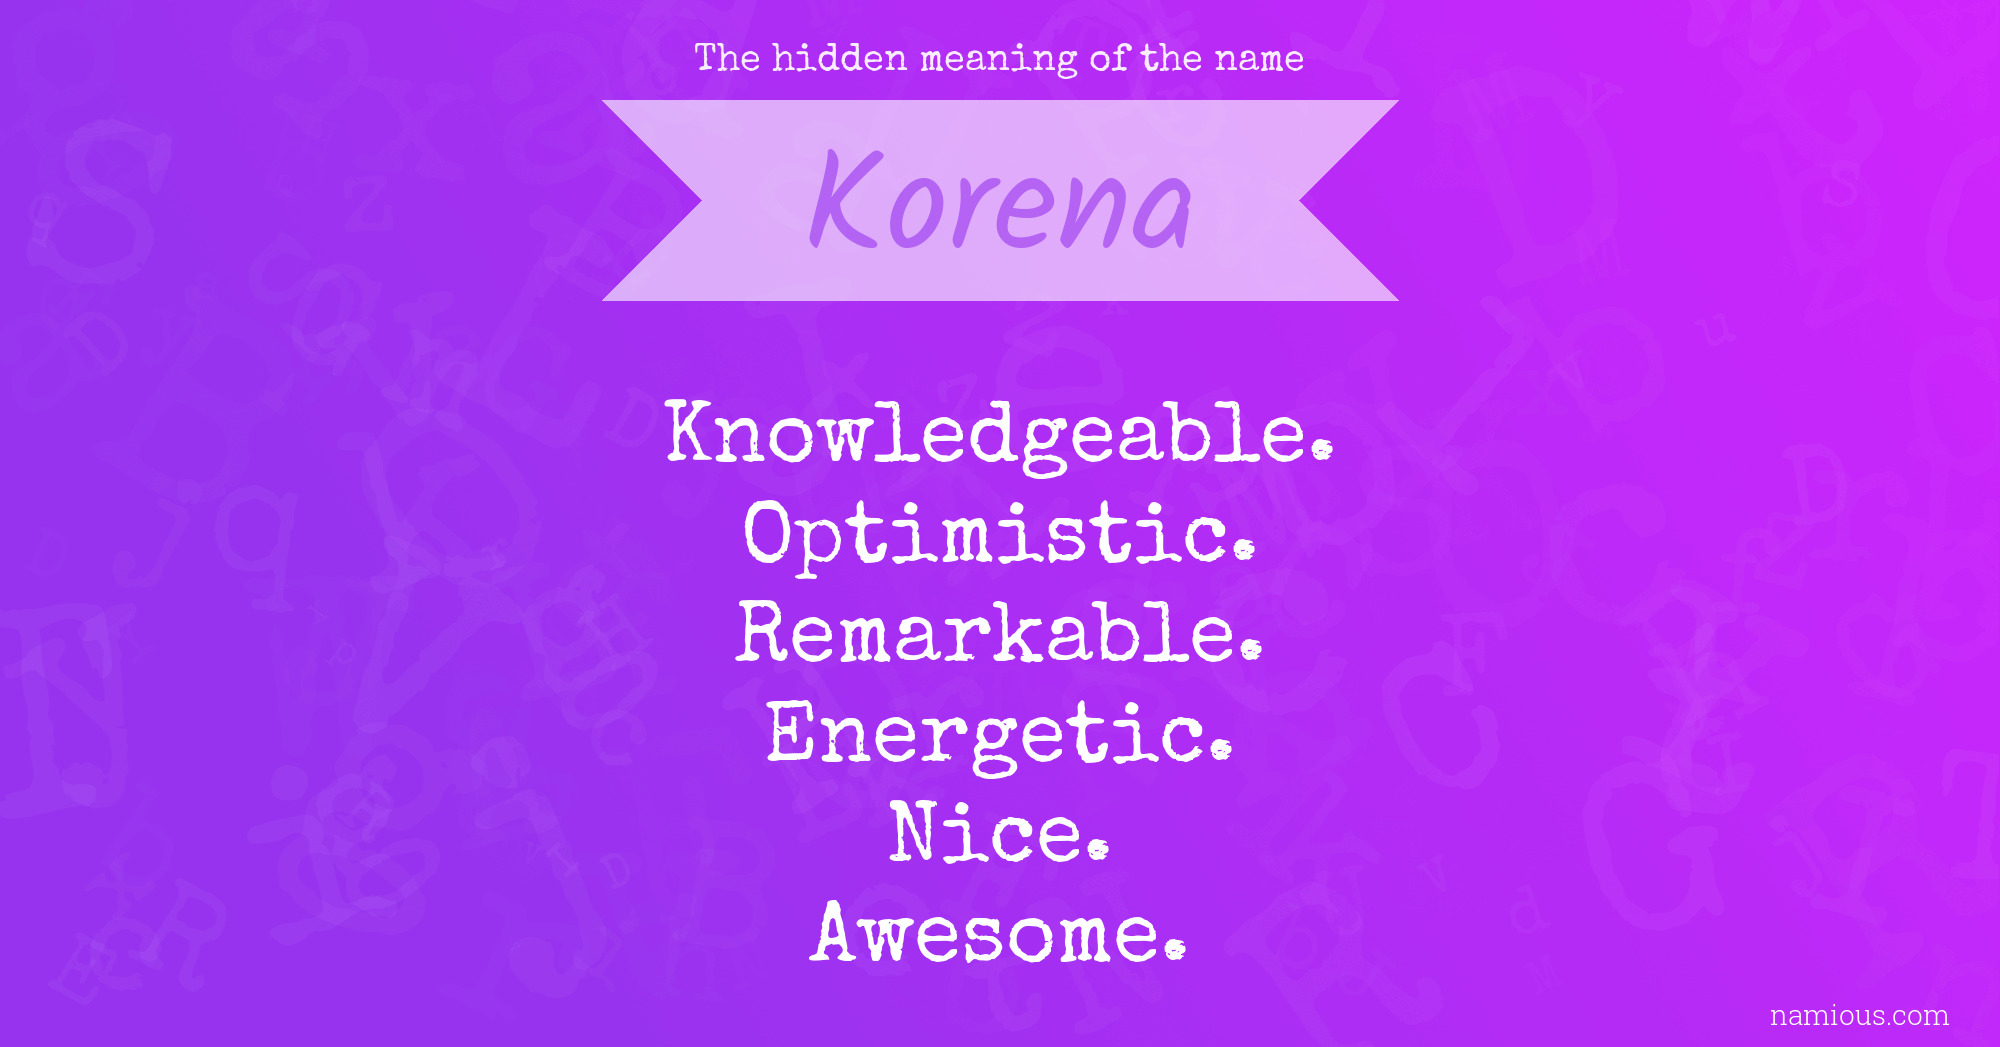 The hidden meaning of the name Korena